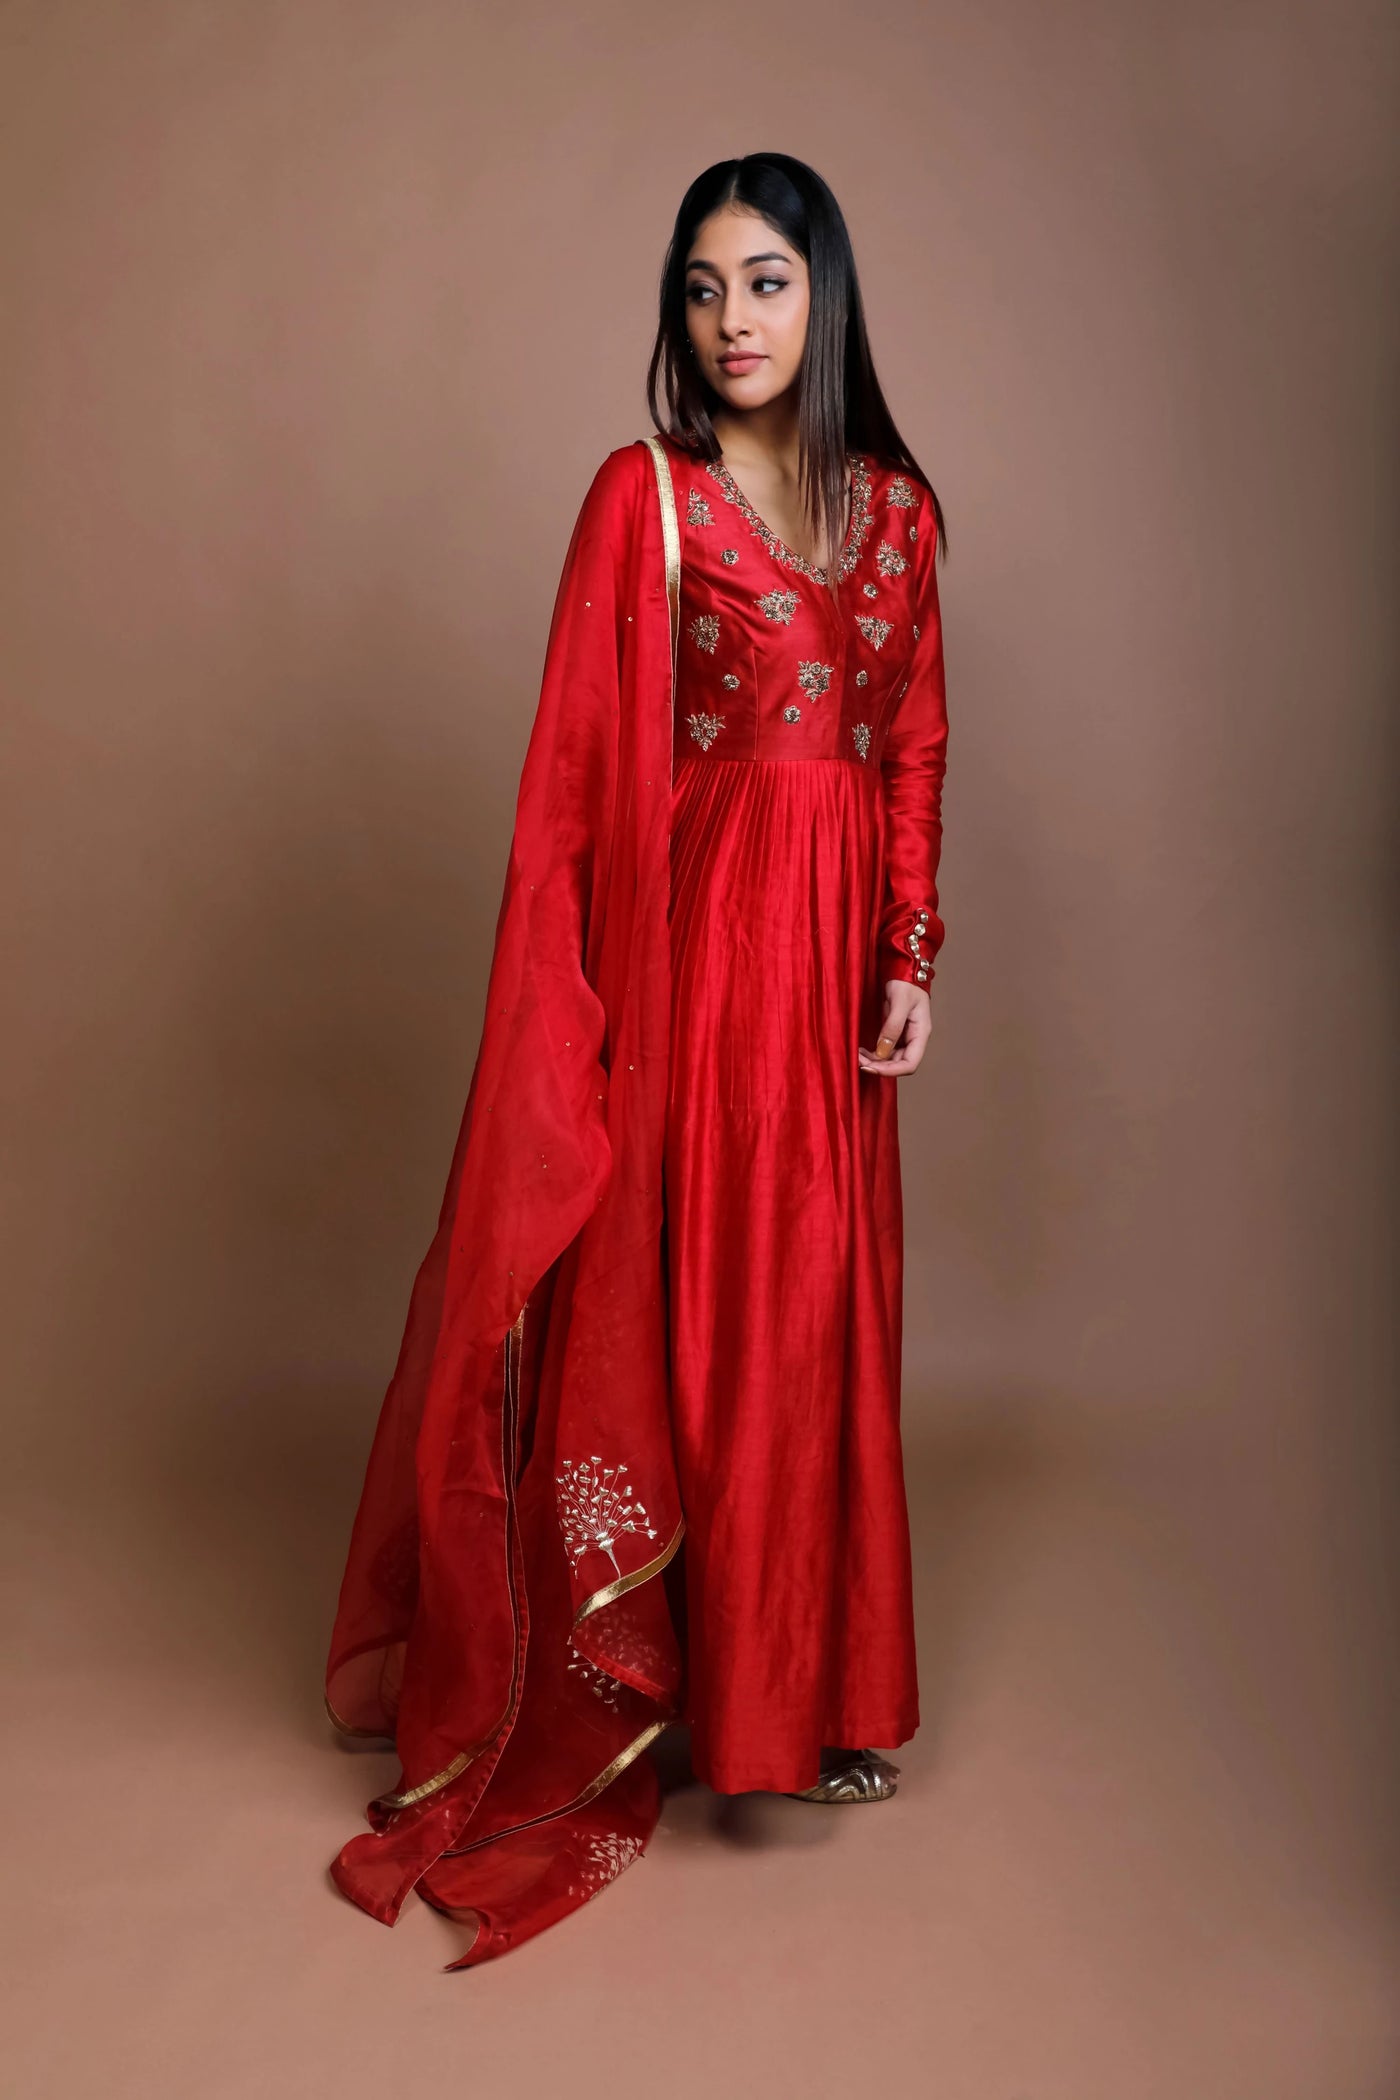 Red Antique Gold Pleated Anarkali Indian Clothing in Denver, CO, Aurora, CO, Boulder, CO, Fort Collins, CO, Colorado Springs, CO, Parker, CO, Highlands Ranch, CO, Cherry Creek, CO, Centennial, CO, and Longmont, CO. NATIONWIDE SHIPPING USA- India Fashion X